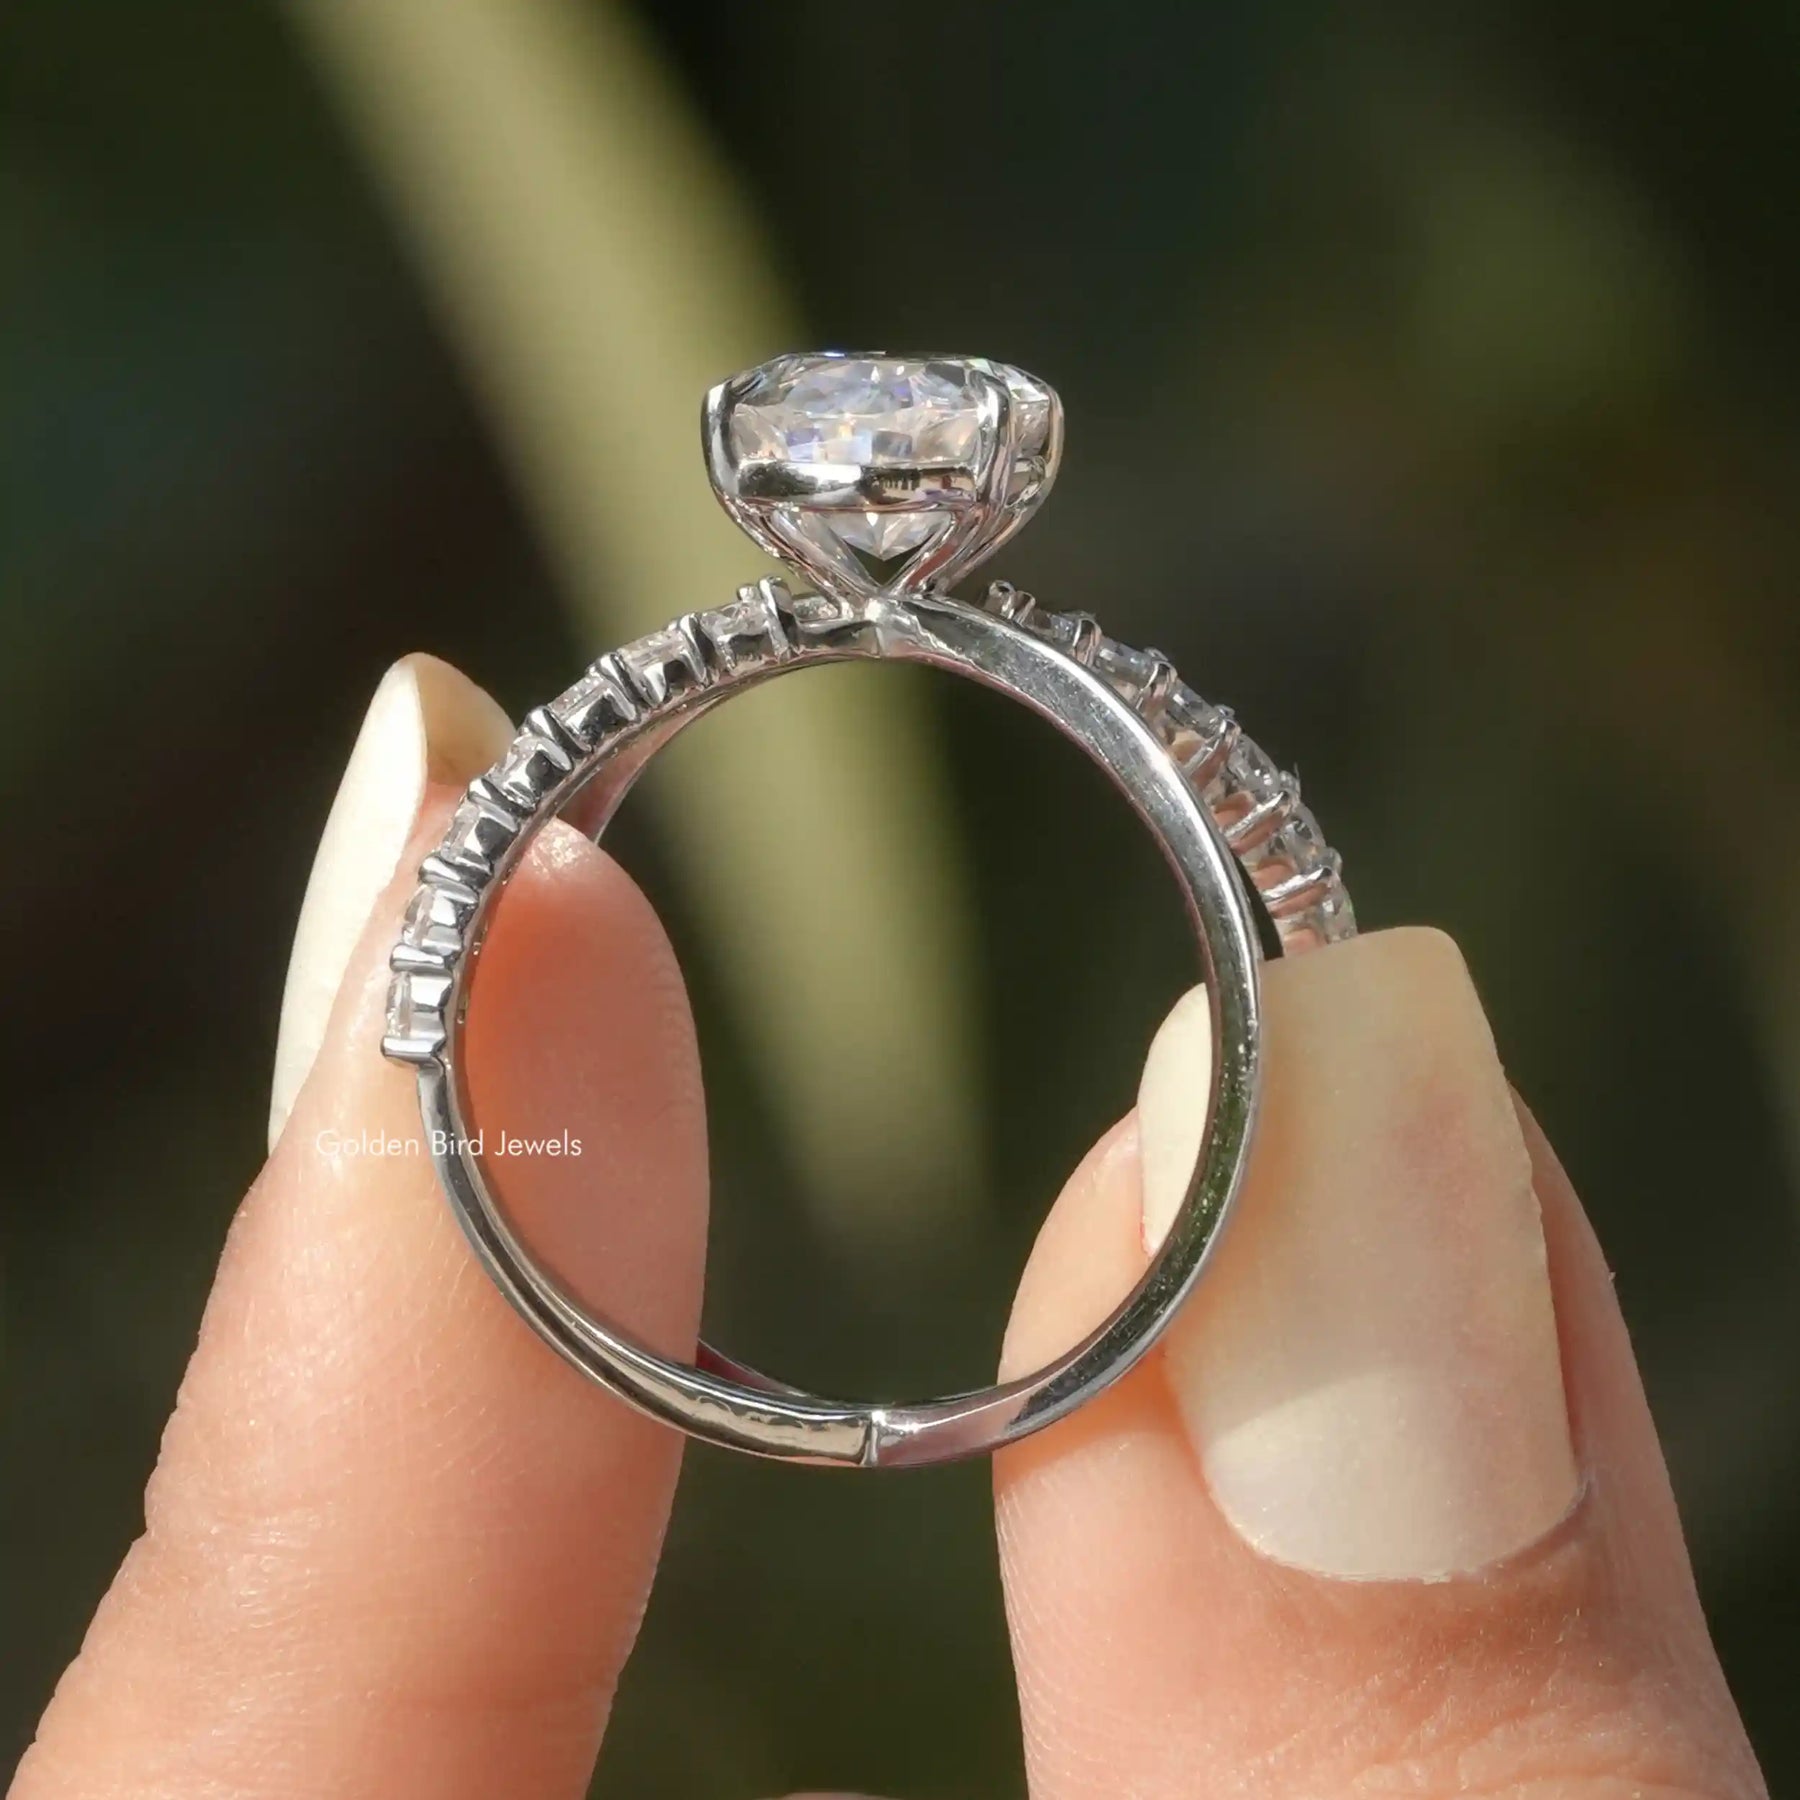 [Side view of oval cut moissanite engagement ring]-[Golden Bird Jewels]